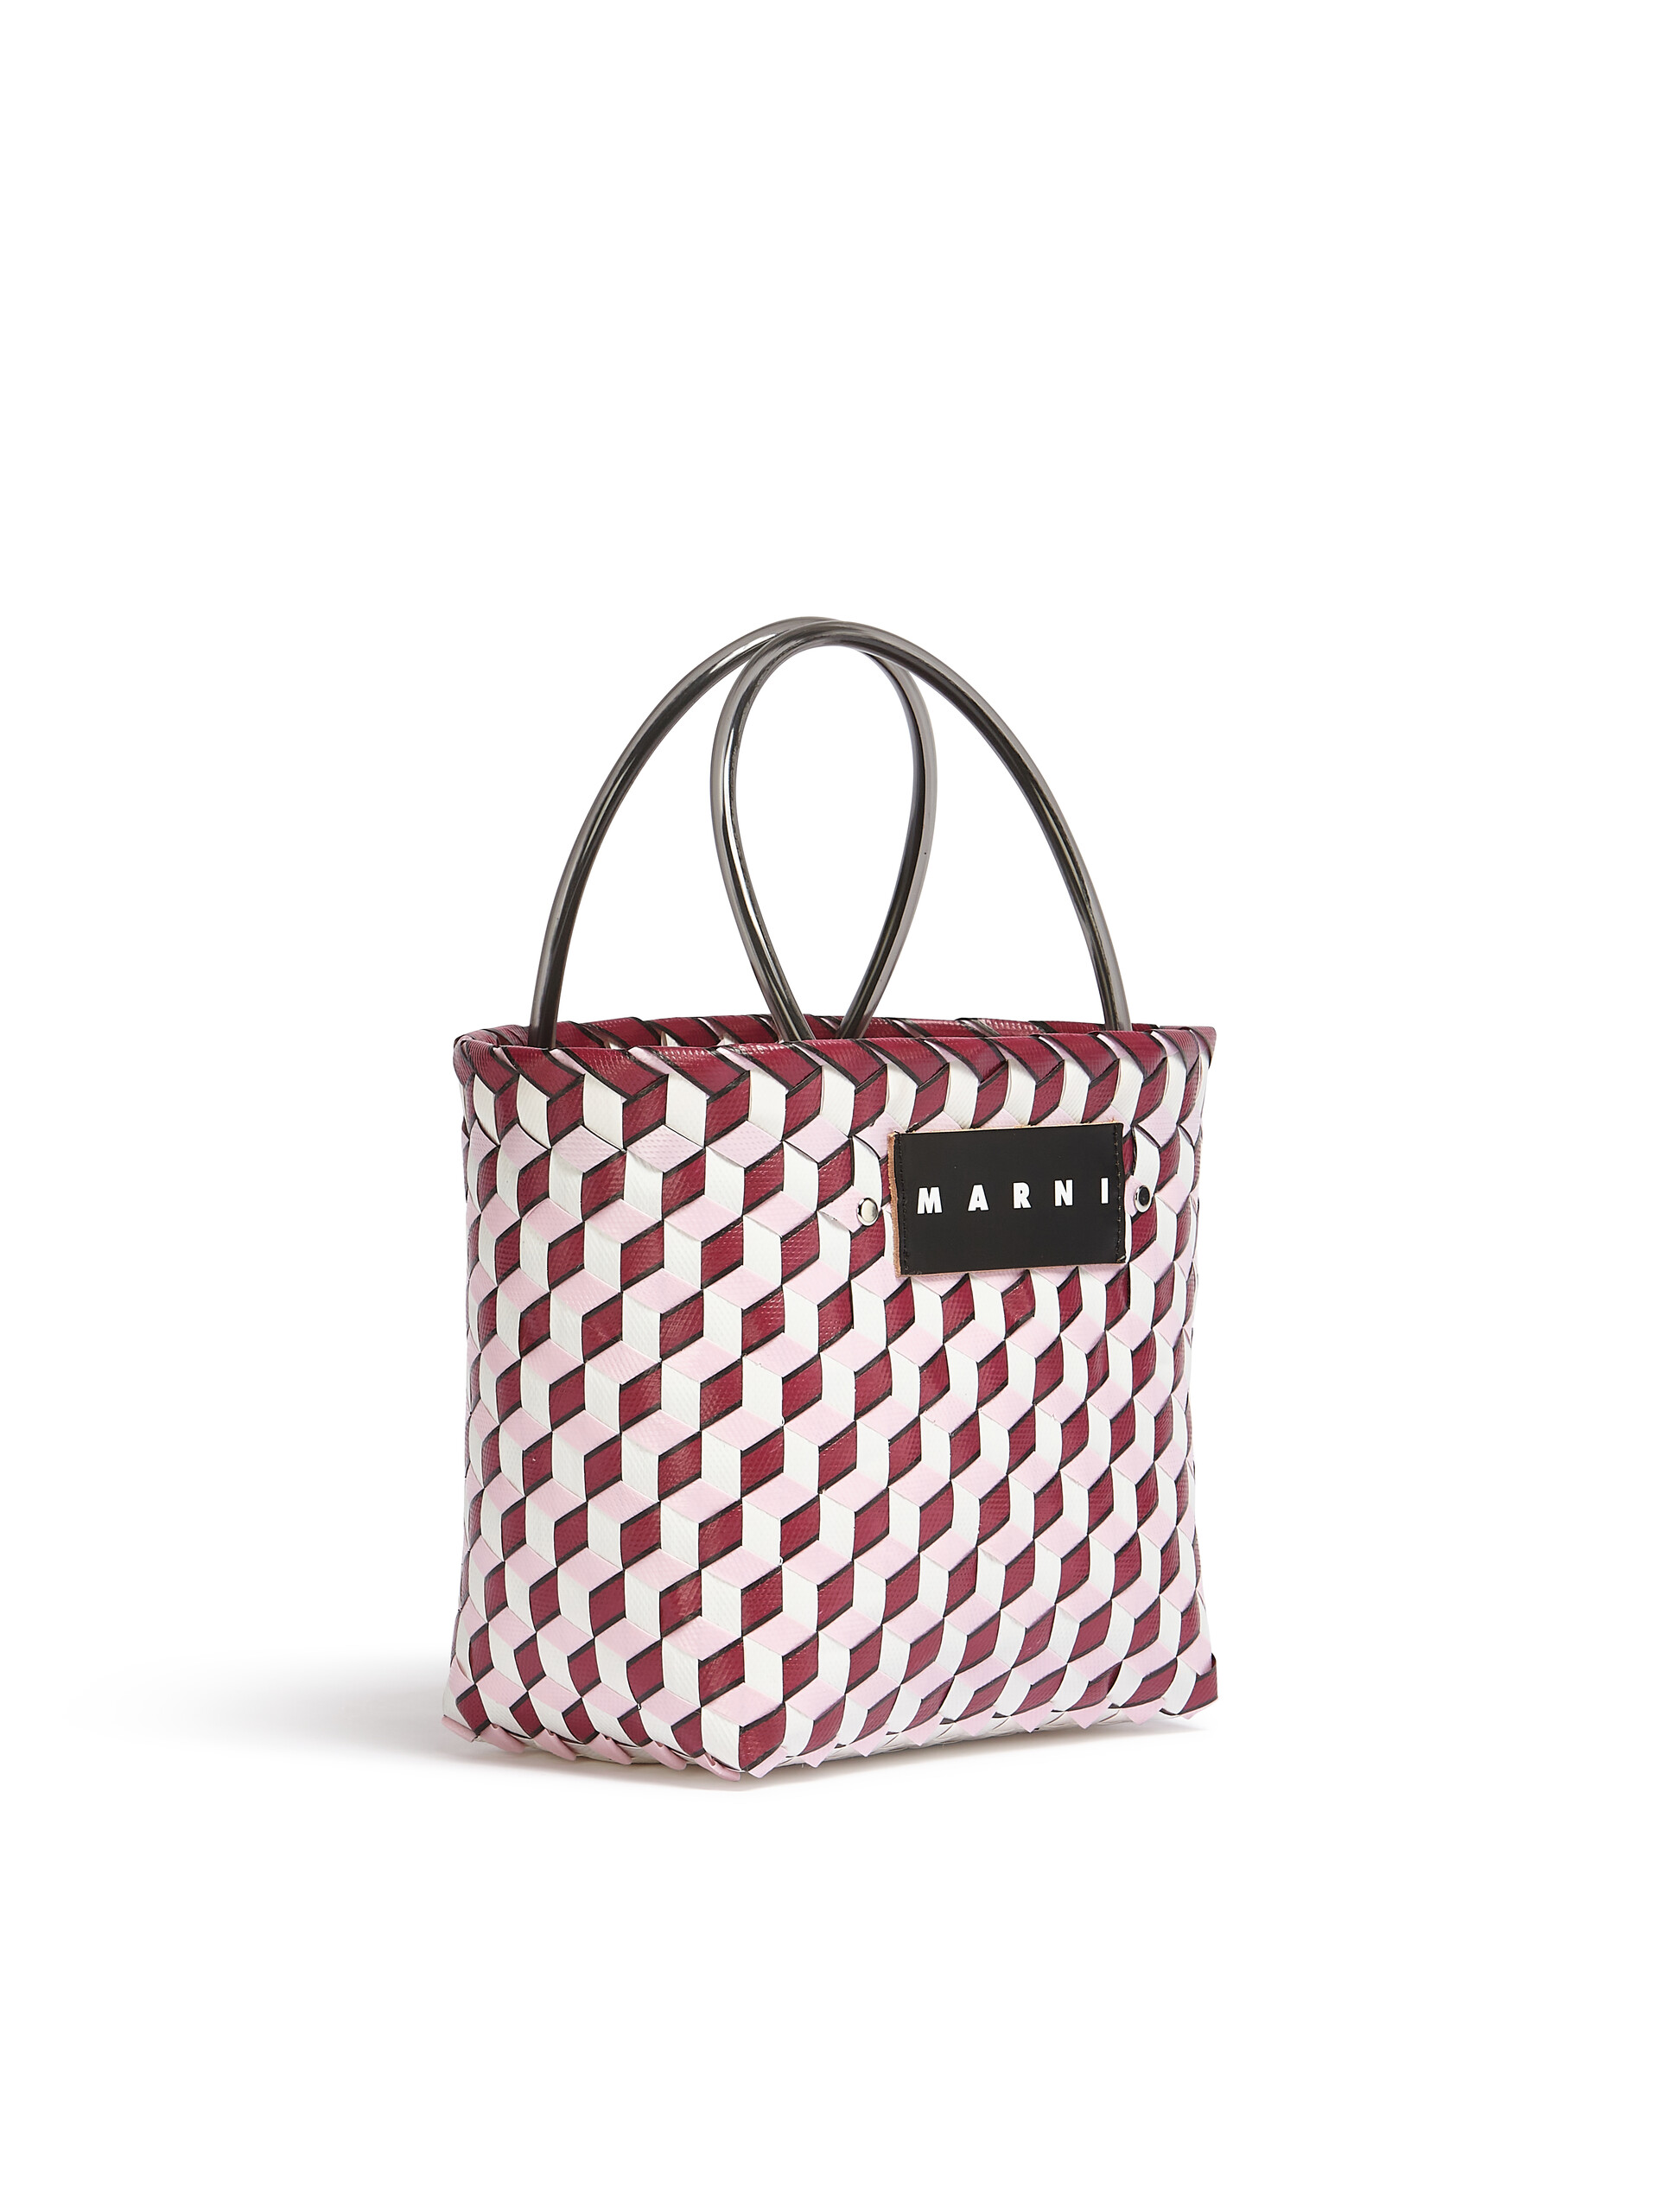 MARNI MARKET 3D BAG in burgundy cube woven material - Shopping Bags - Image 2